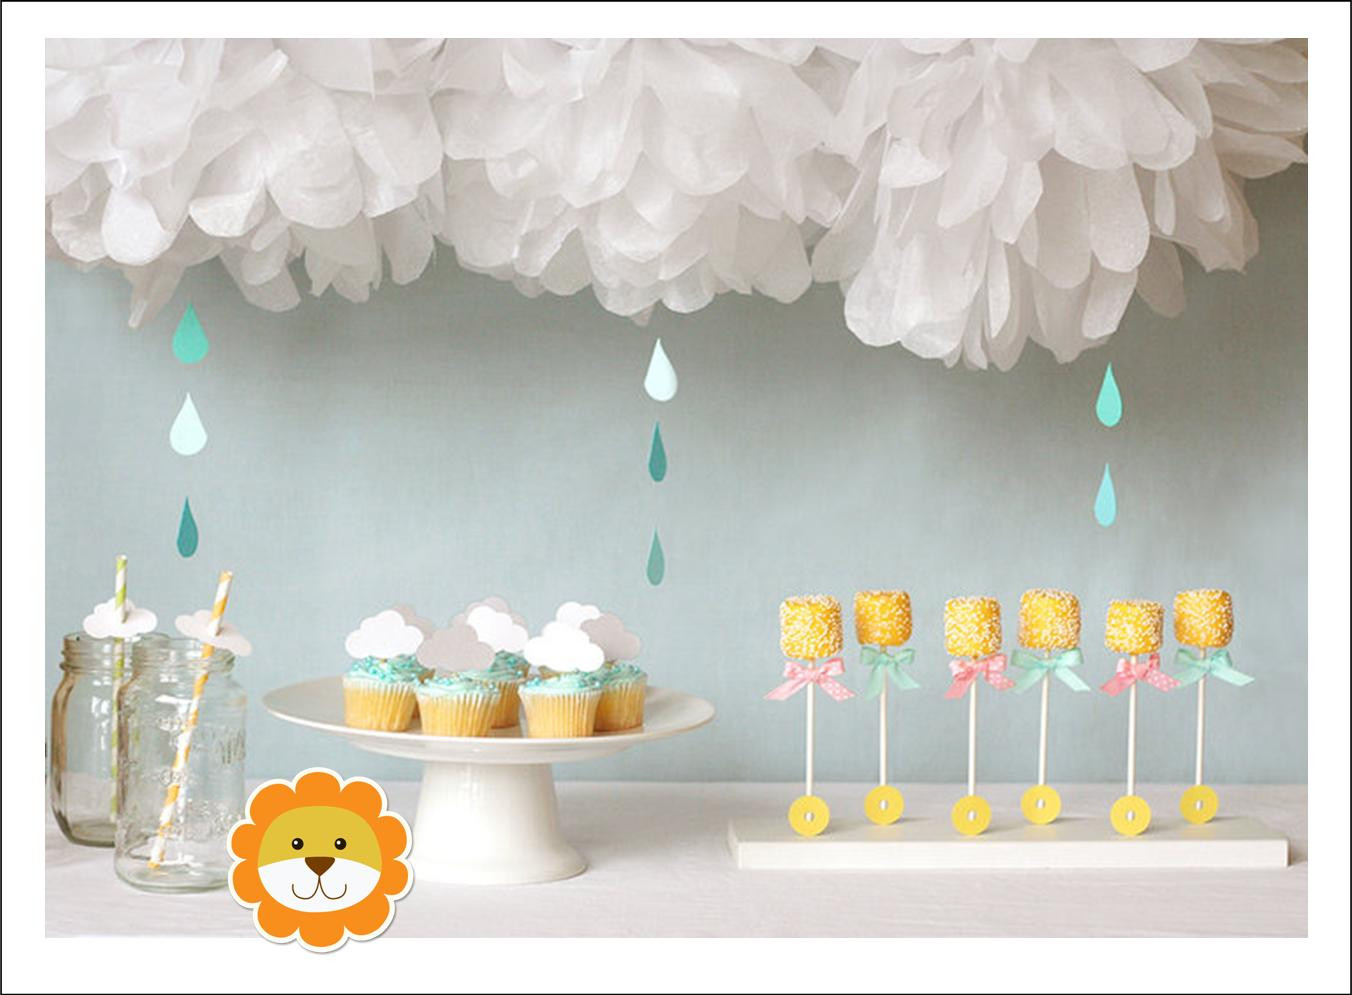 Cute Baby Shower Decoration Ideas
 It s Written on the Wall Cute Ideas for Your Baby Shower